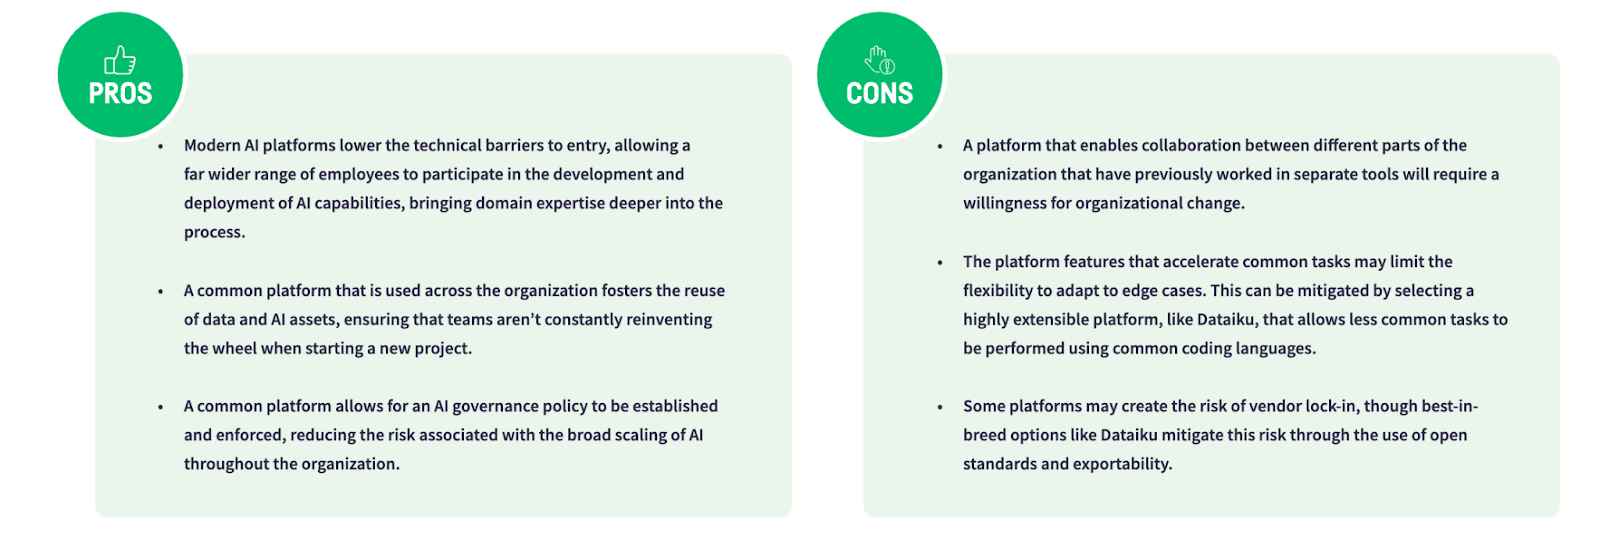 pros and cons to an AI platform